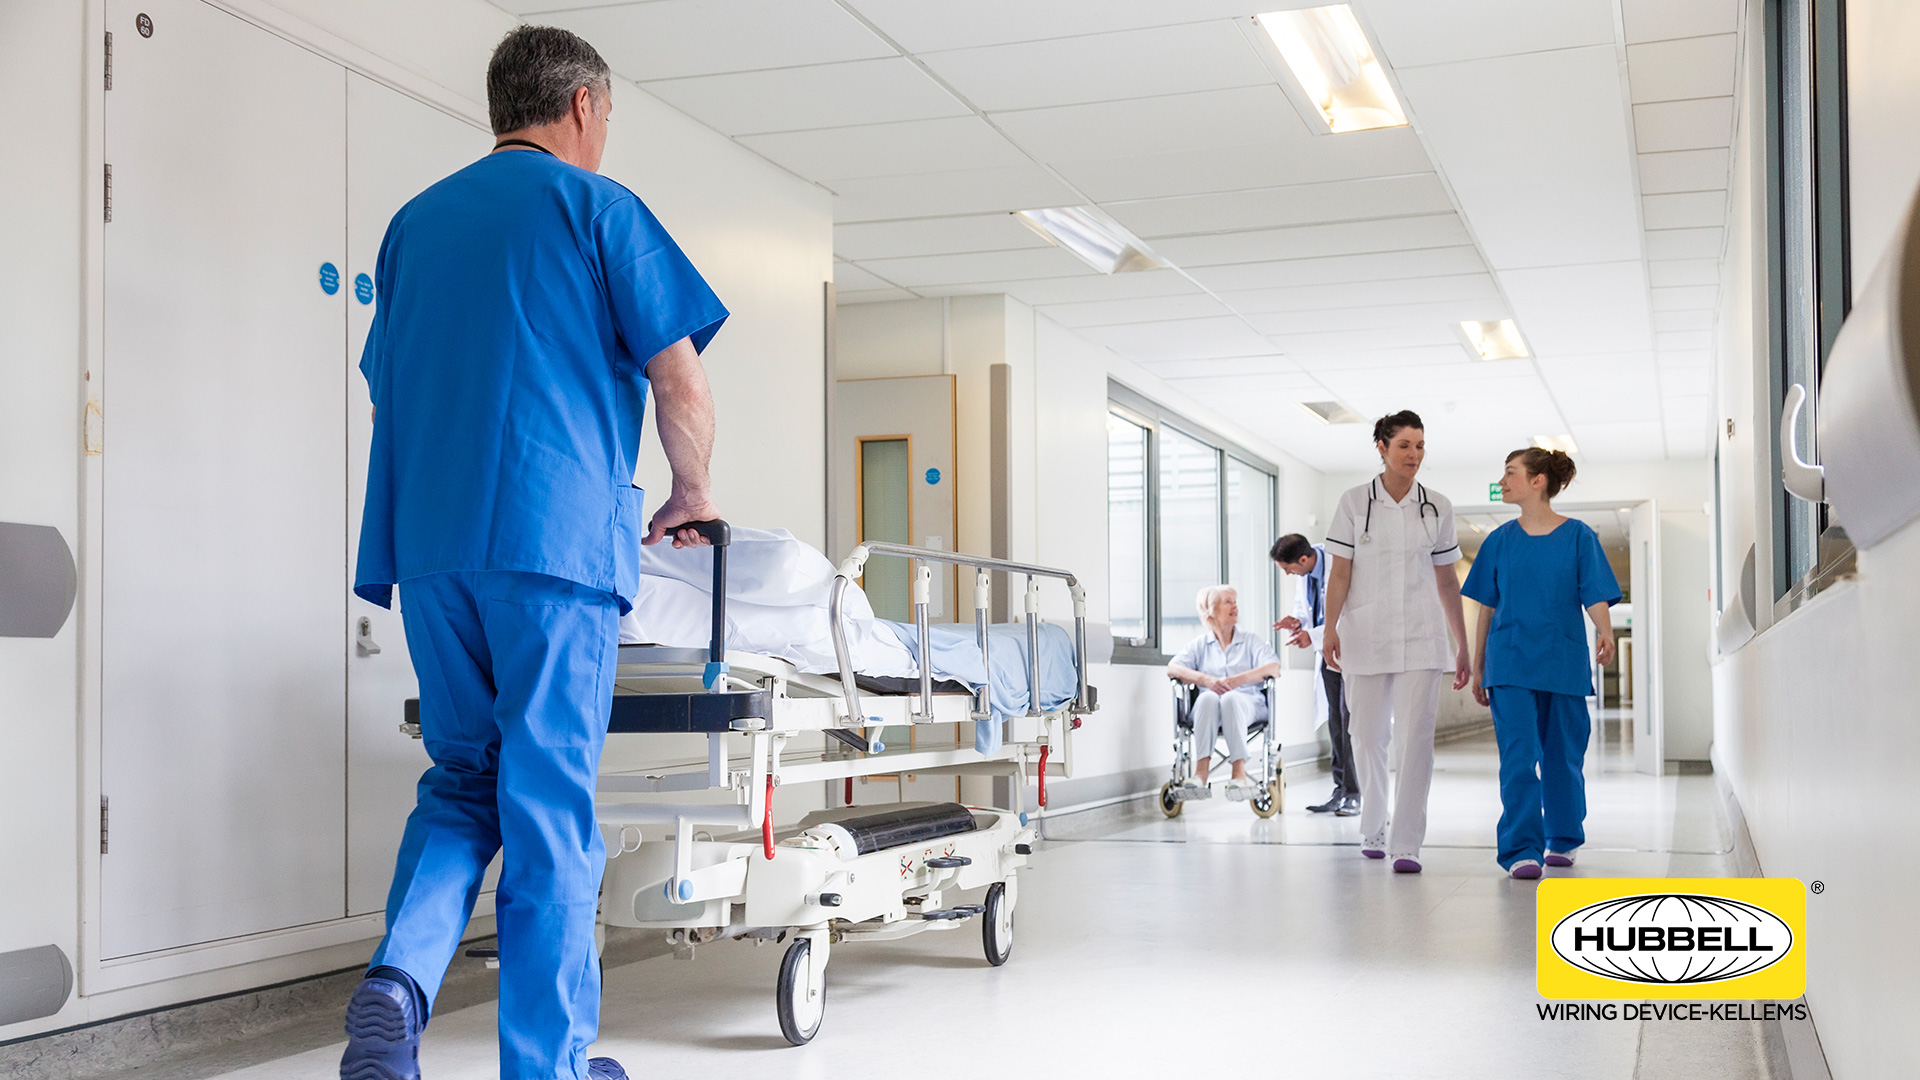 Ensuring Peak Performance & Reliability for Electrical Devices in Healthcare Environments